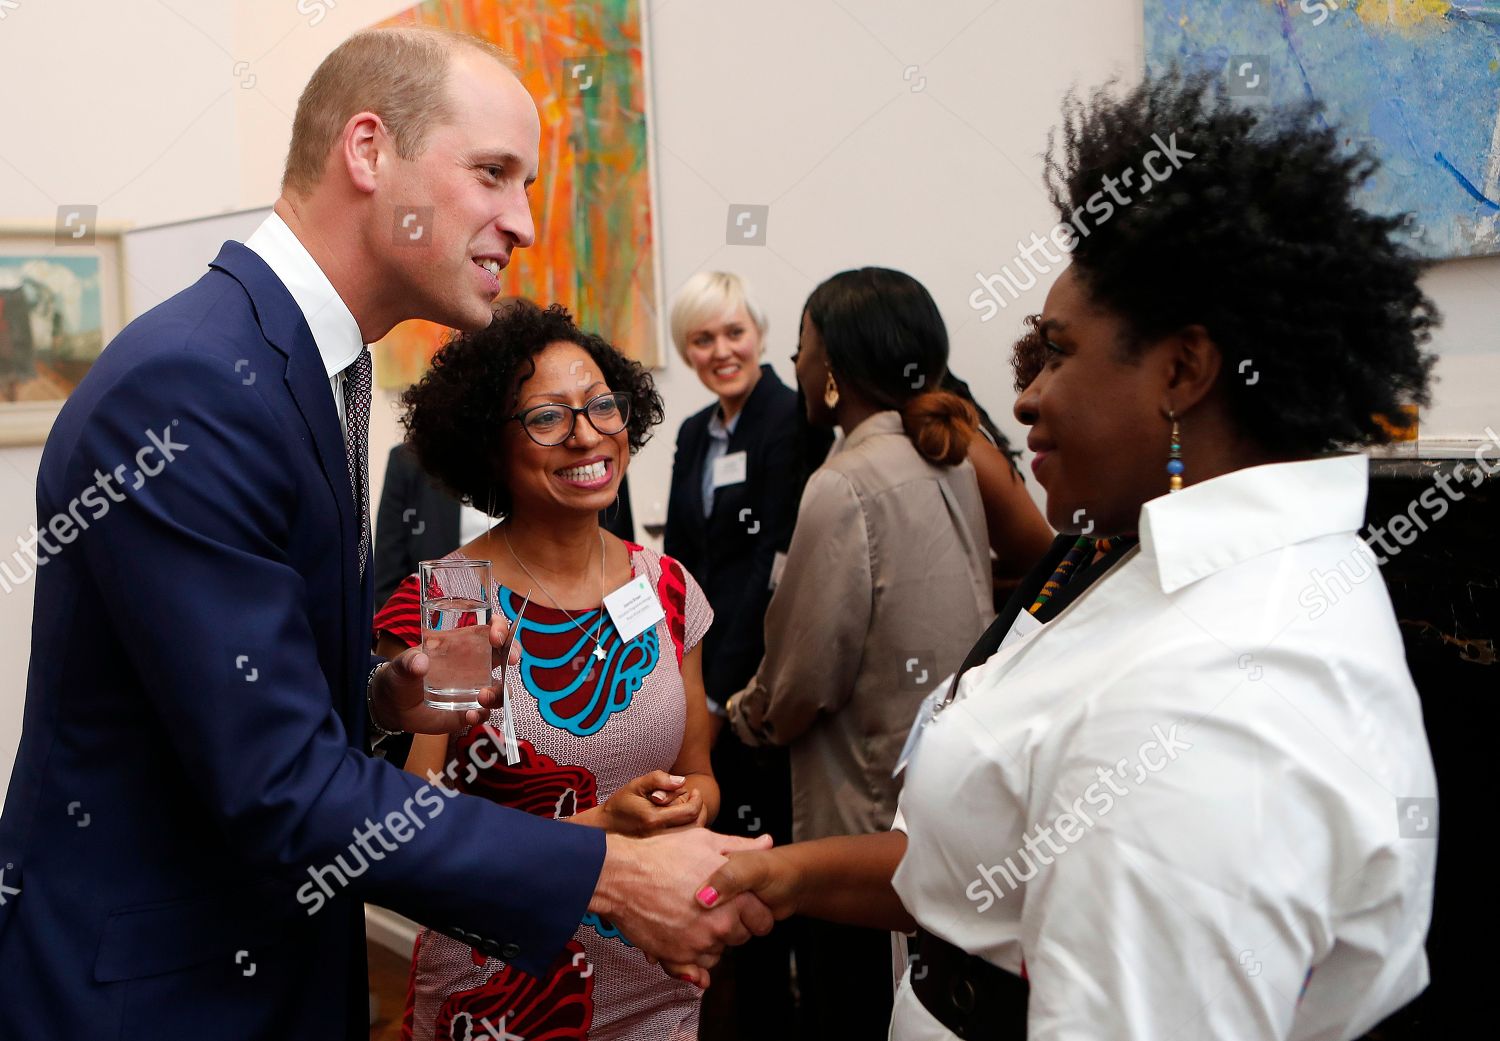 prince-william-attends-royal-african-society-reception-london-uk-shutterstock-editorial-9880610a.jpg